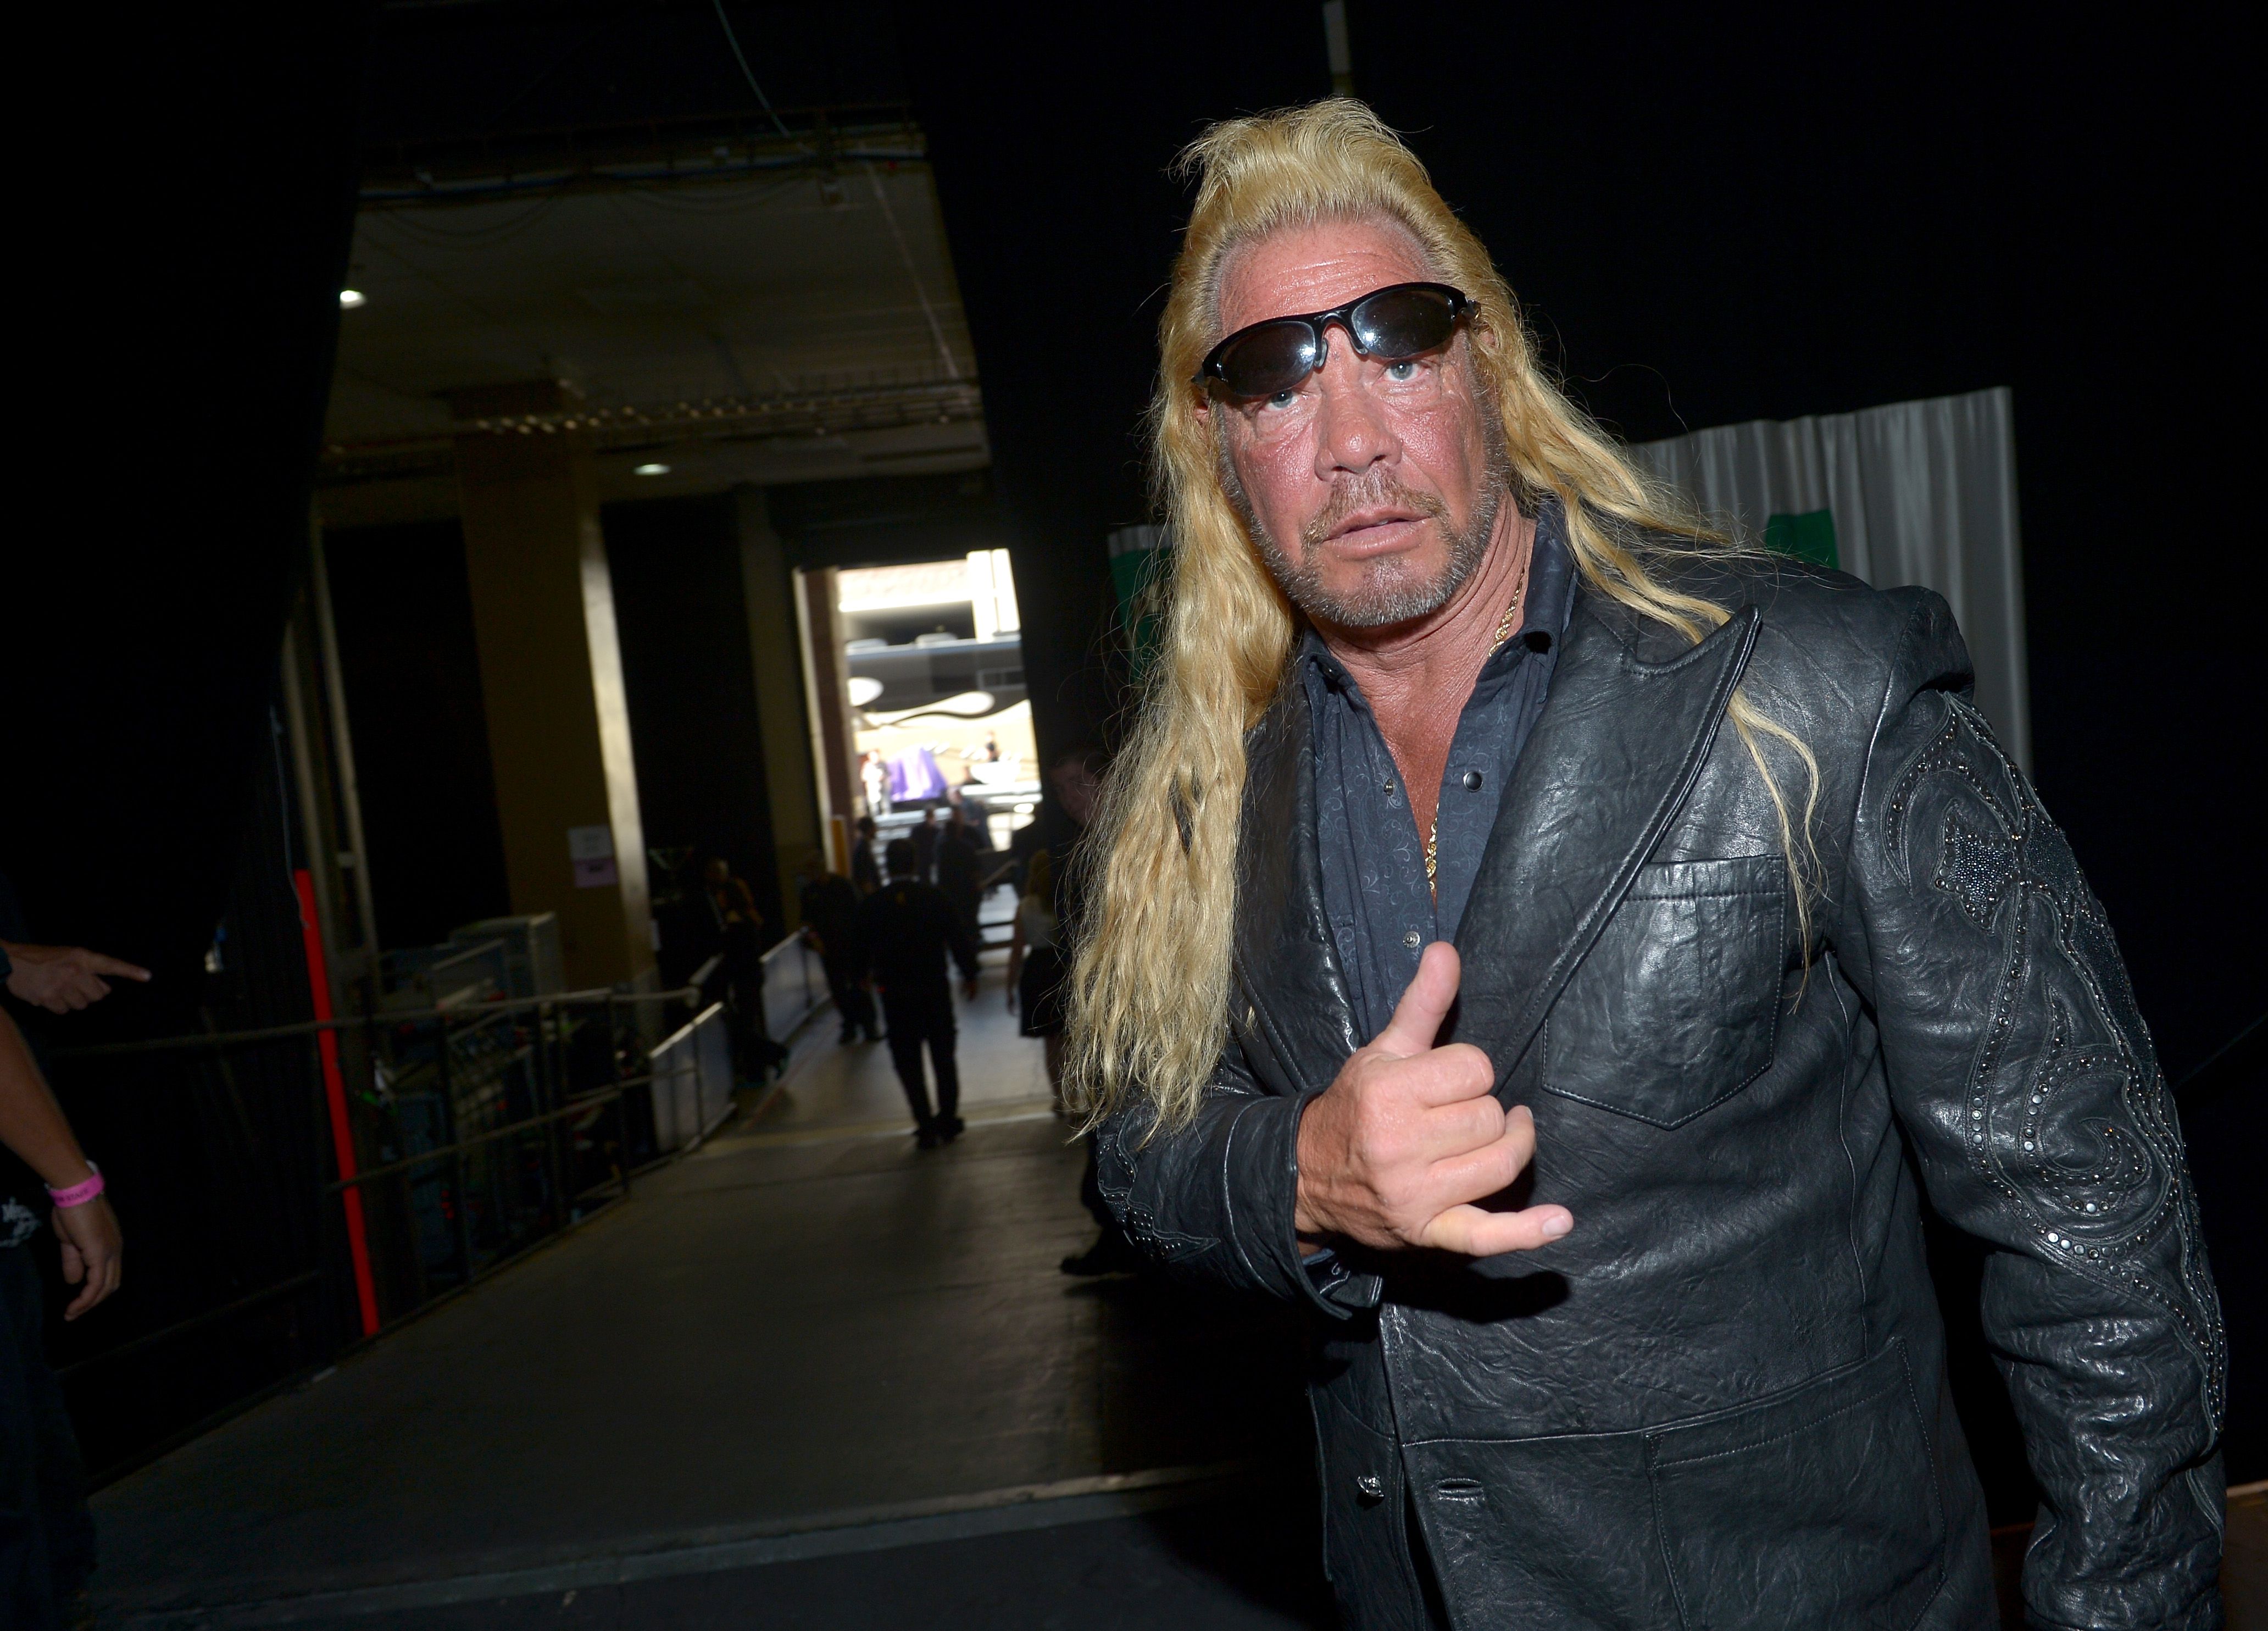 Dog the Bounty Hunter at the 48th Annual Academy of Country Music Awards on April 7, 2013 | Photo: Getty Images